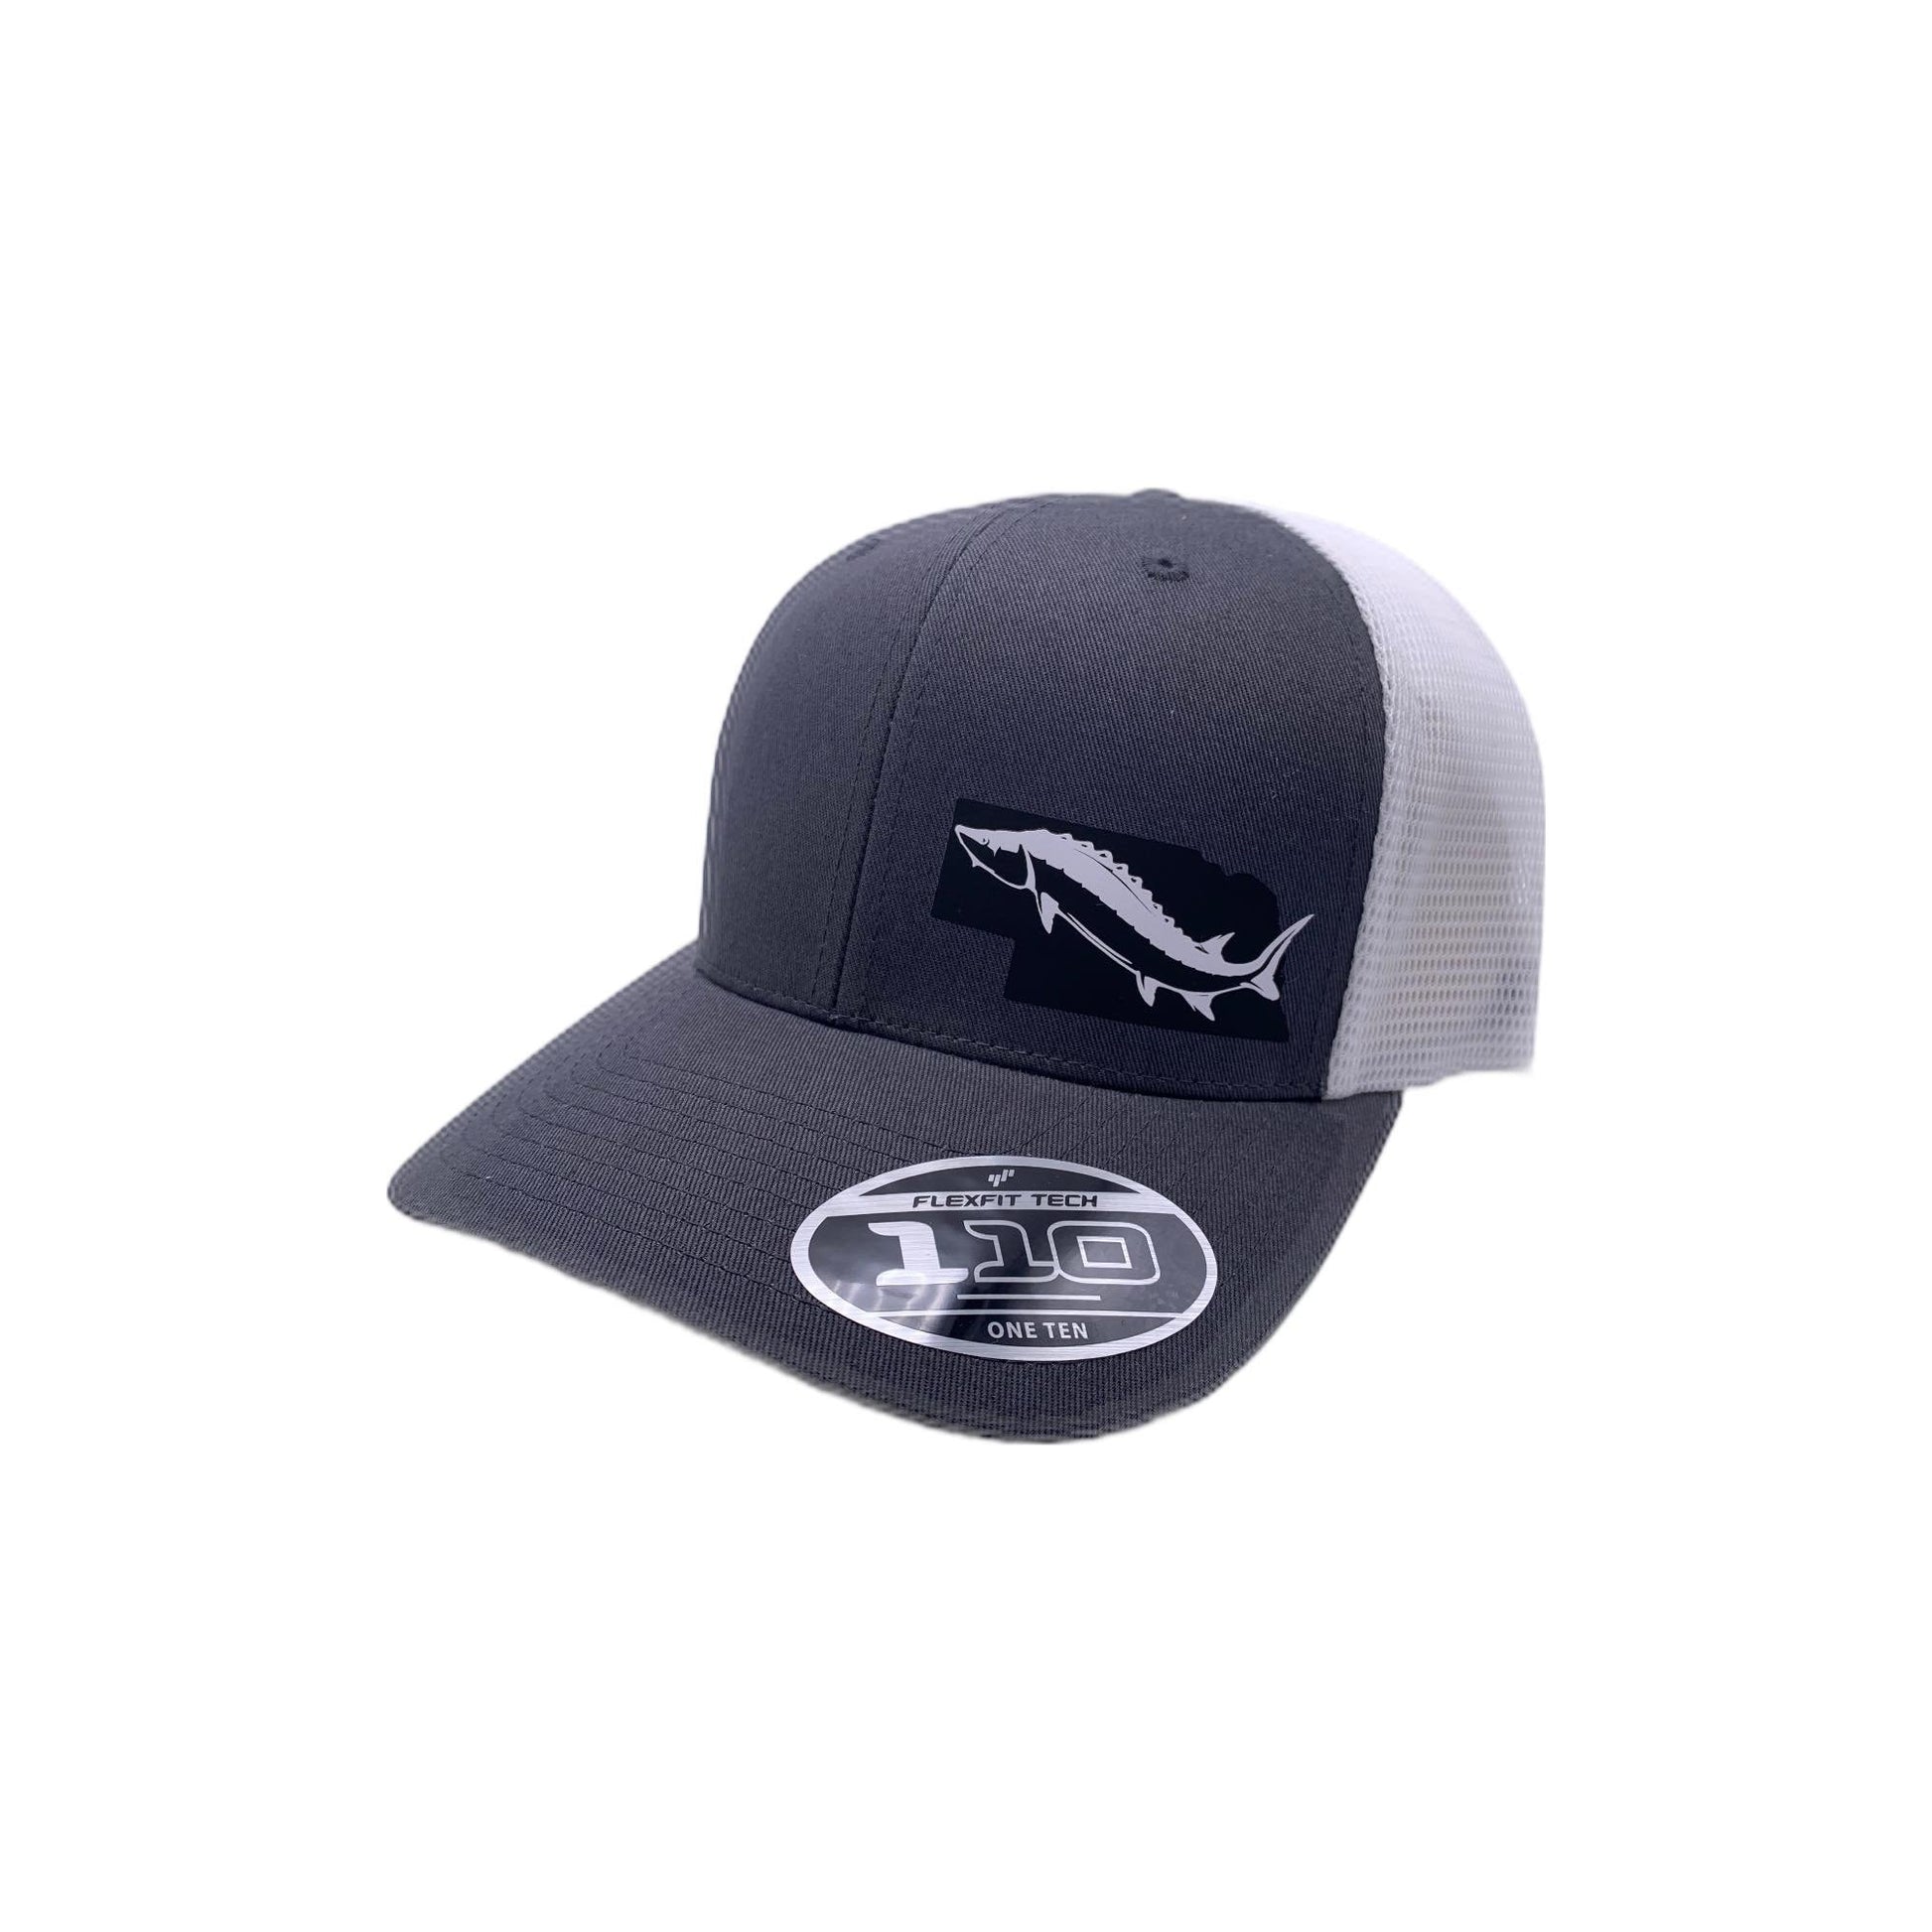 Sturgeon Fishing Snap Back Adjustable Hat with Multiple Hat Options